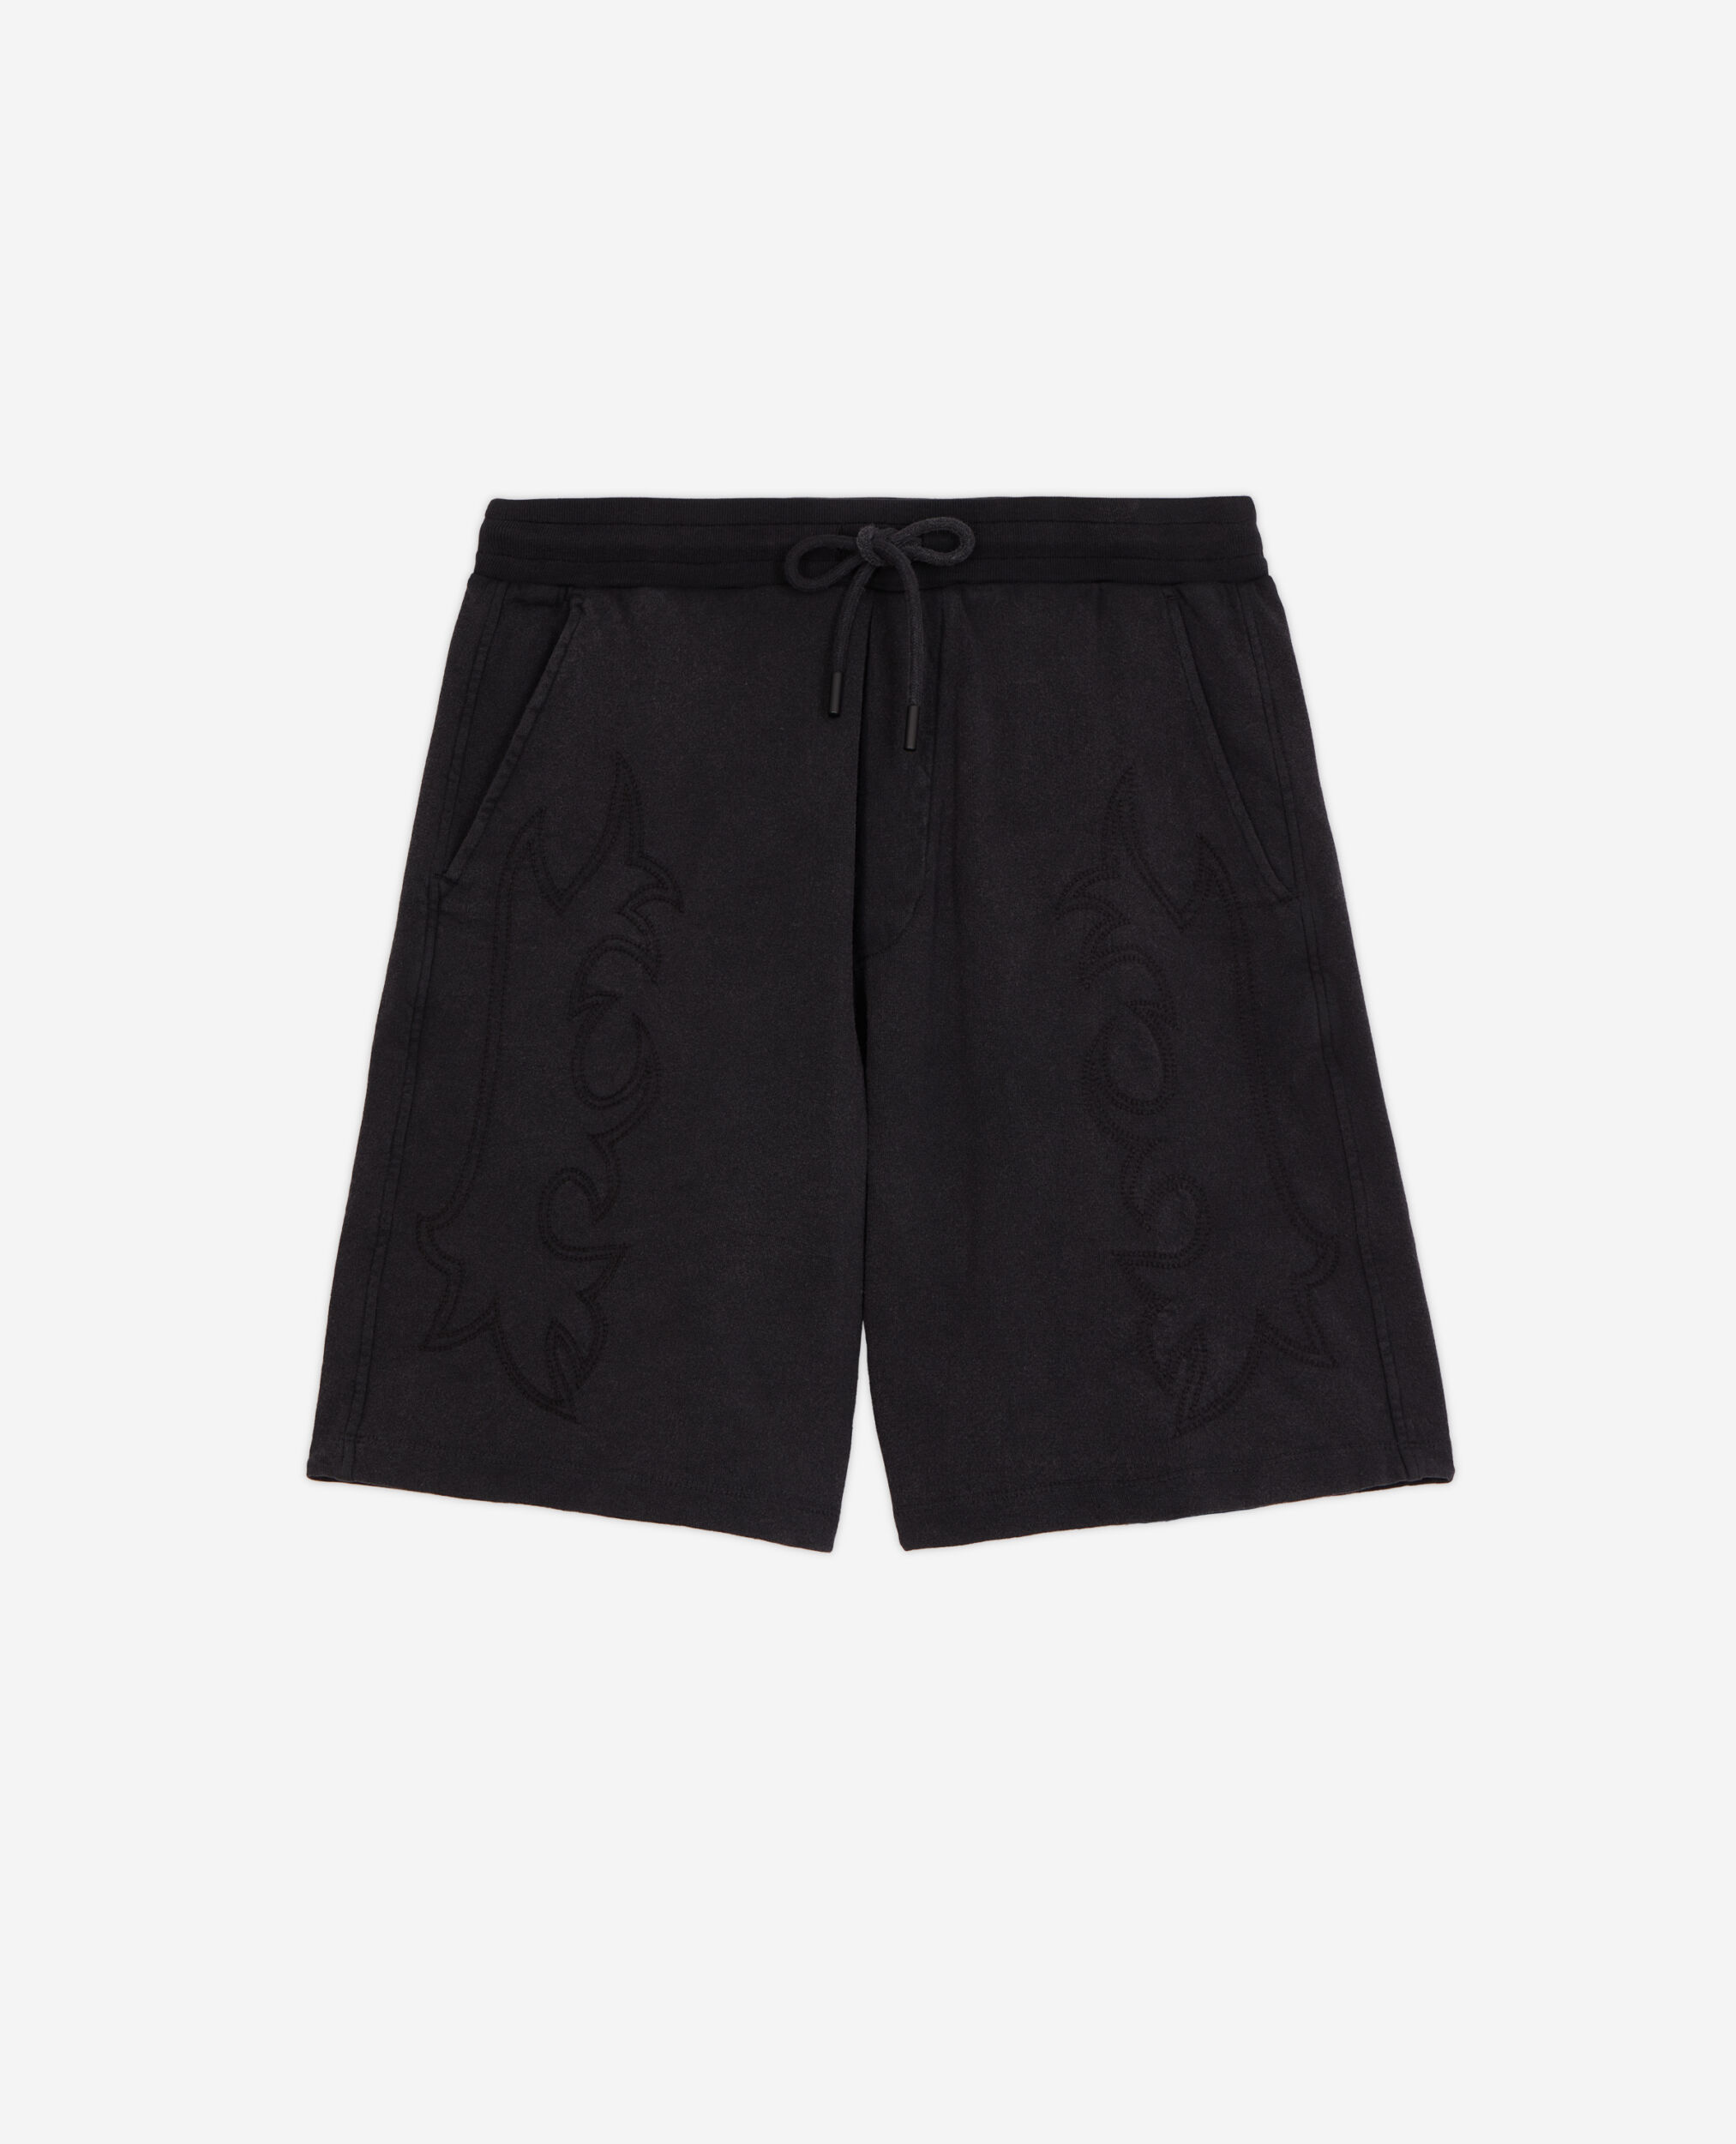 Black fleece shorts with Western-style embroidery, BLACK WASHED, hi-res image number null